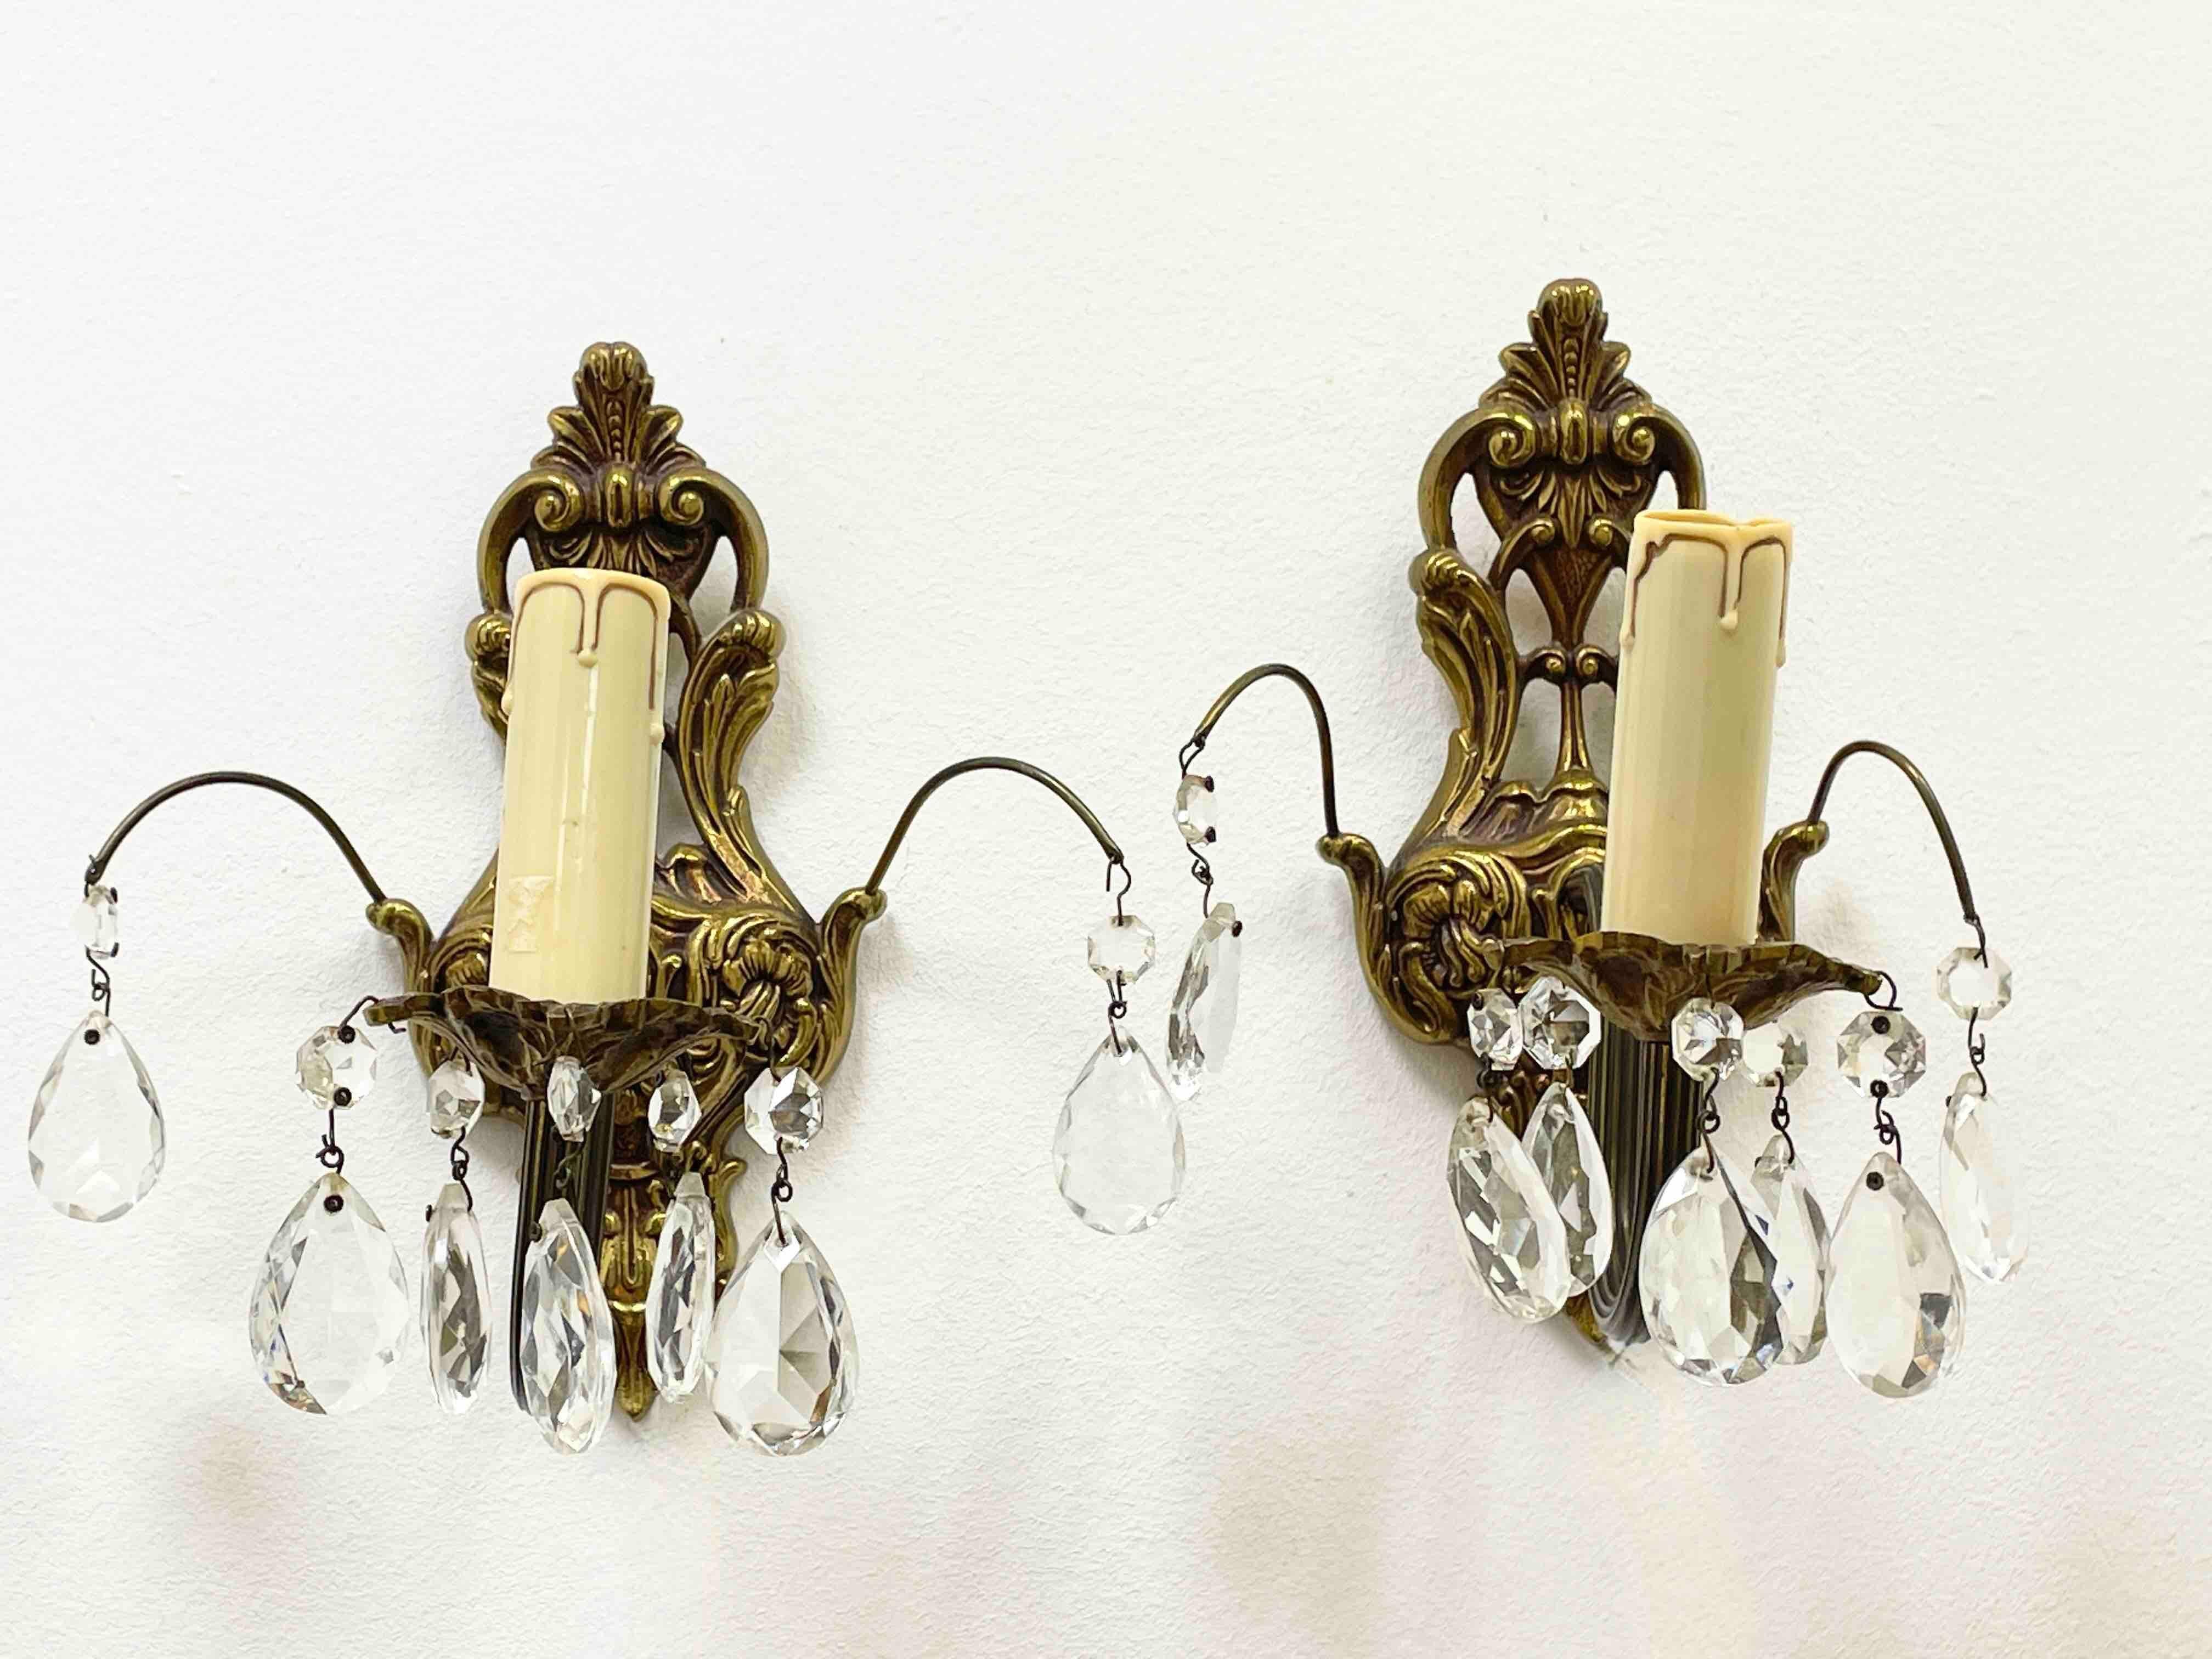 Pair of nice sconces. Each fixture requires a European E14 candelabra bulb, bulb up to 40 watts. Each wall light has a beautiful patina and gives each room an eclectic statement. Made of bronze metal and crystal glass. Nice addition to any room.